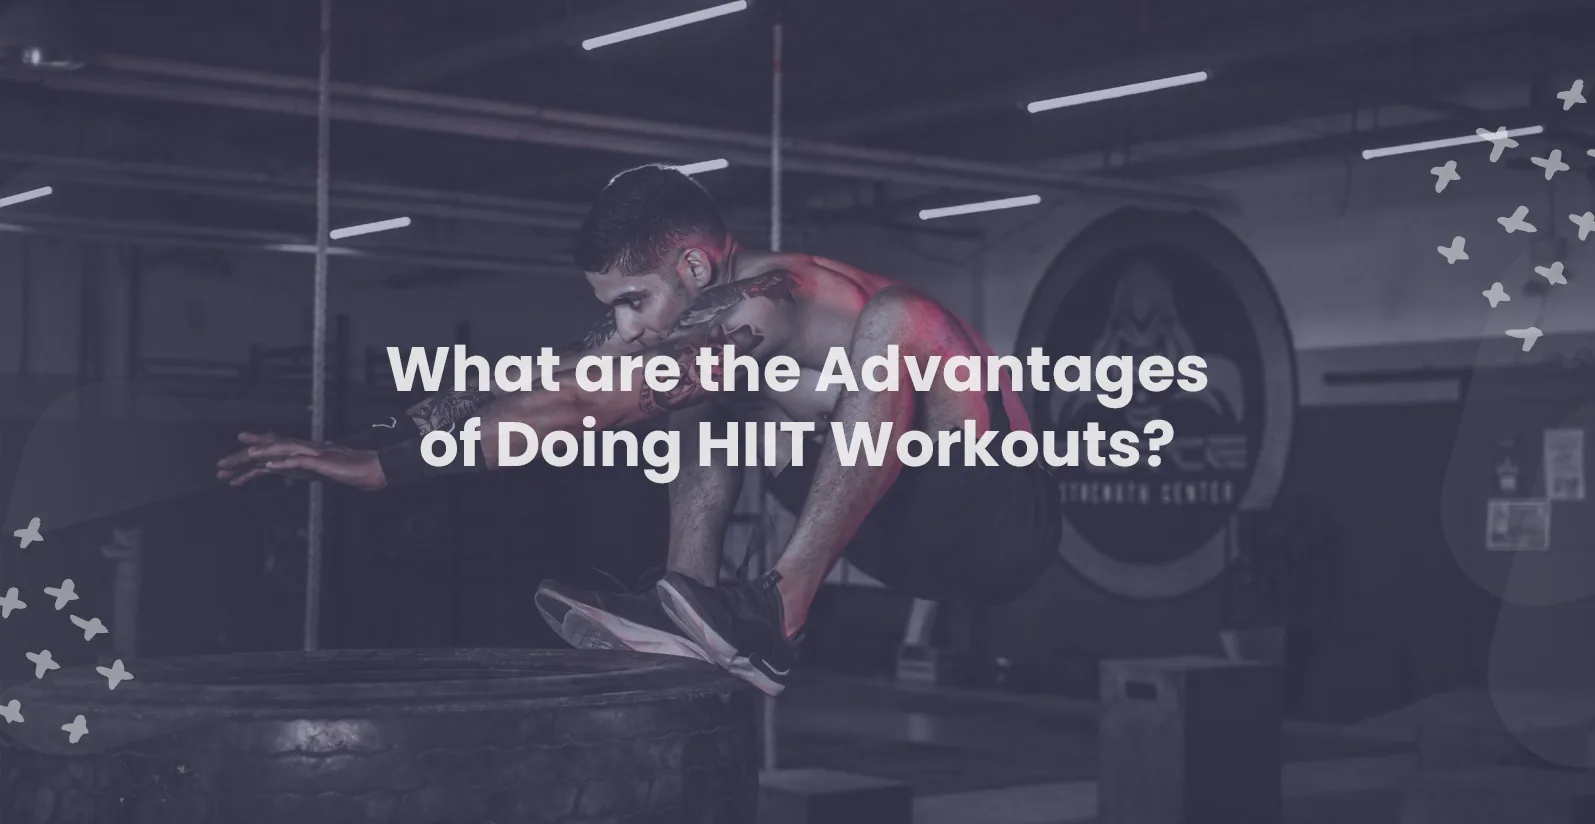 Advantages of Doing HIIT Workouts